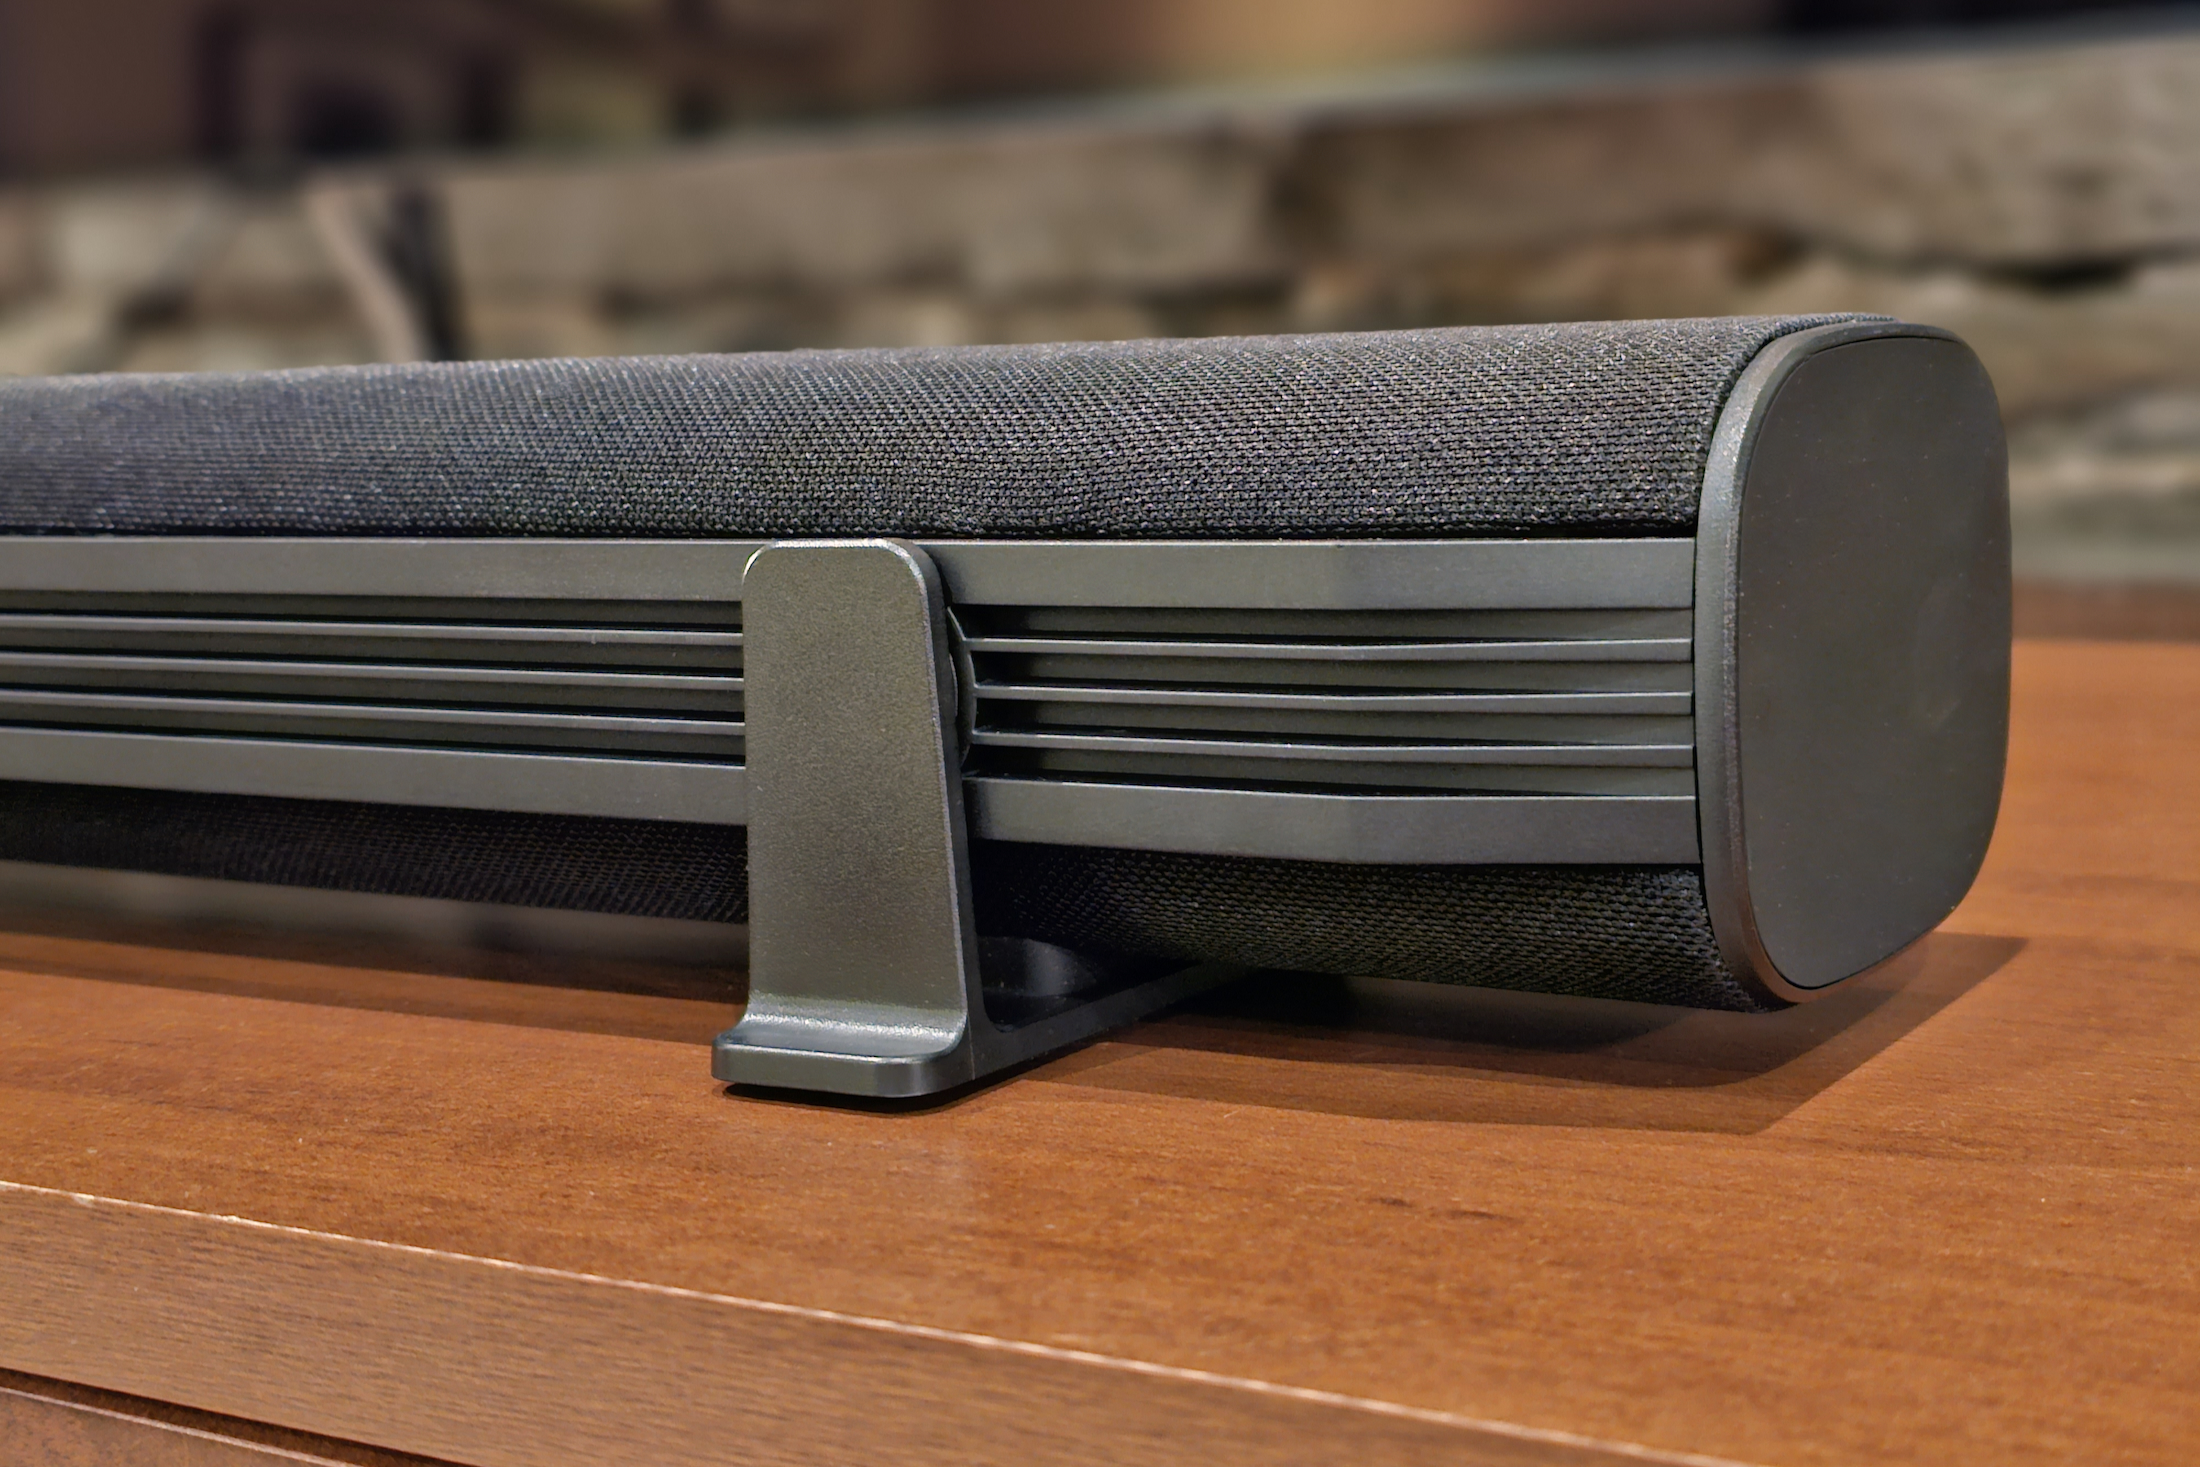 Platin Audio Milan 5.1.4 soundbar rear panel with rubber foot attached.